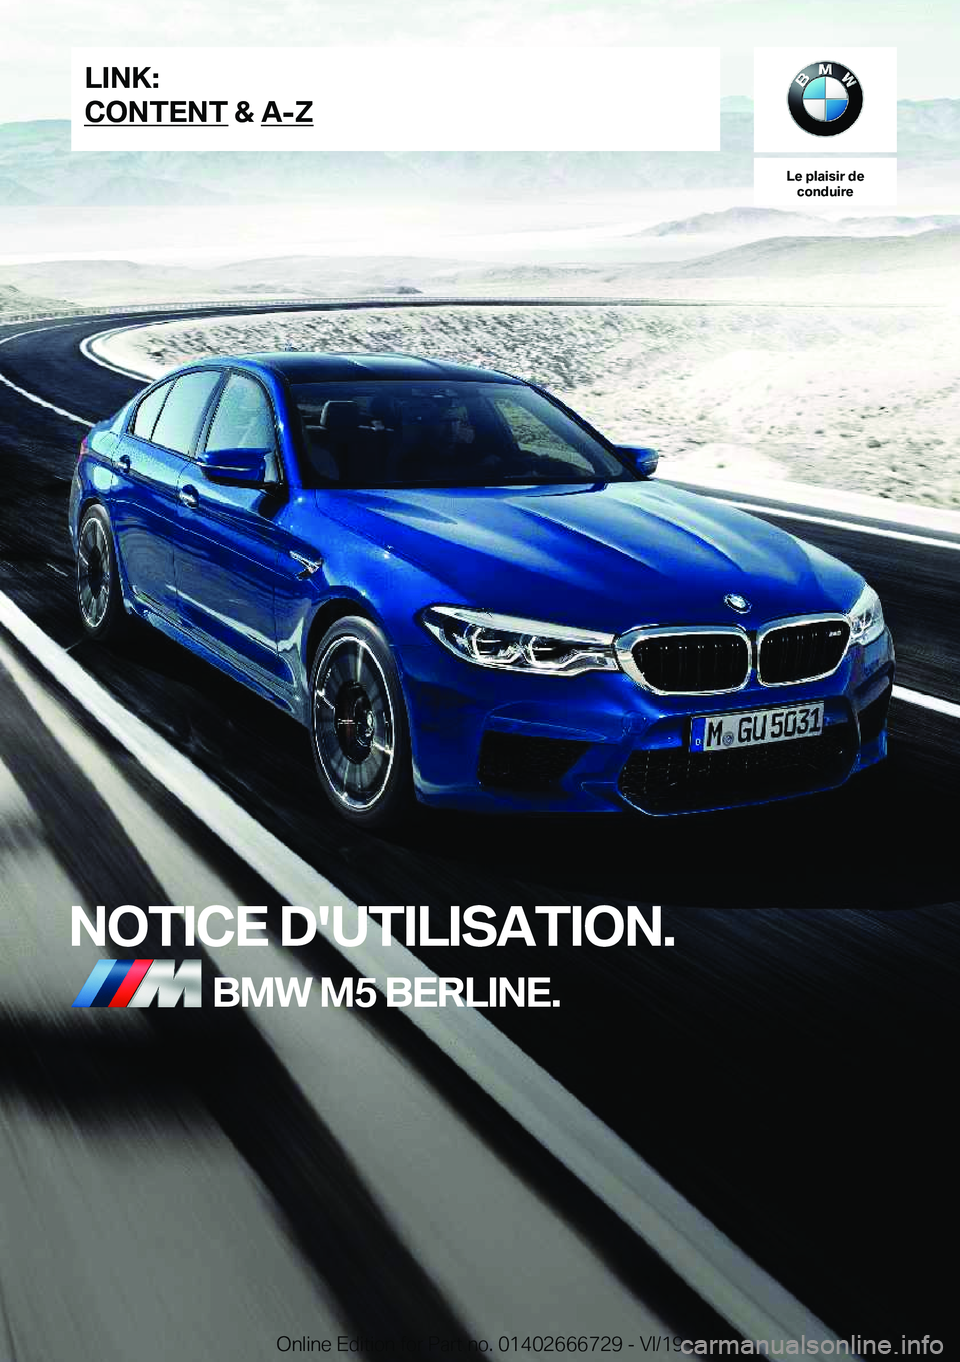 BMW M5 2020  Notices Demploi (in French) �L�e��p�l�a�i�s�i�r��d�e�c�o�n�d�u�i�r�e
�N�O�T�I�C�E��D�'�U�T�I�L�I�S�A�T�I�O�N�.�B�M�W��M�5��B�E�R�L�I�N�E�.�L�I�N�K�:
�C�O�N�T�E�N�T��&��A�-�Z�O�n�l�i�n�e��E�d�i�t�i�o�n��f�o�r��P�a�r